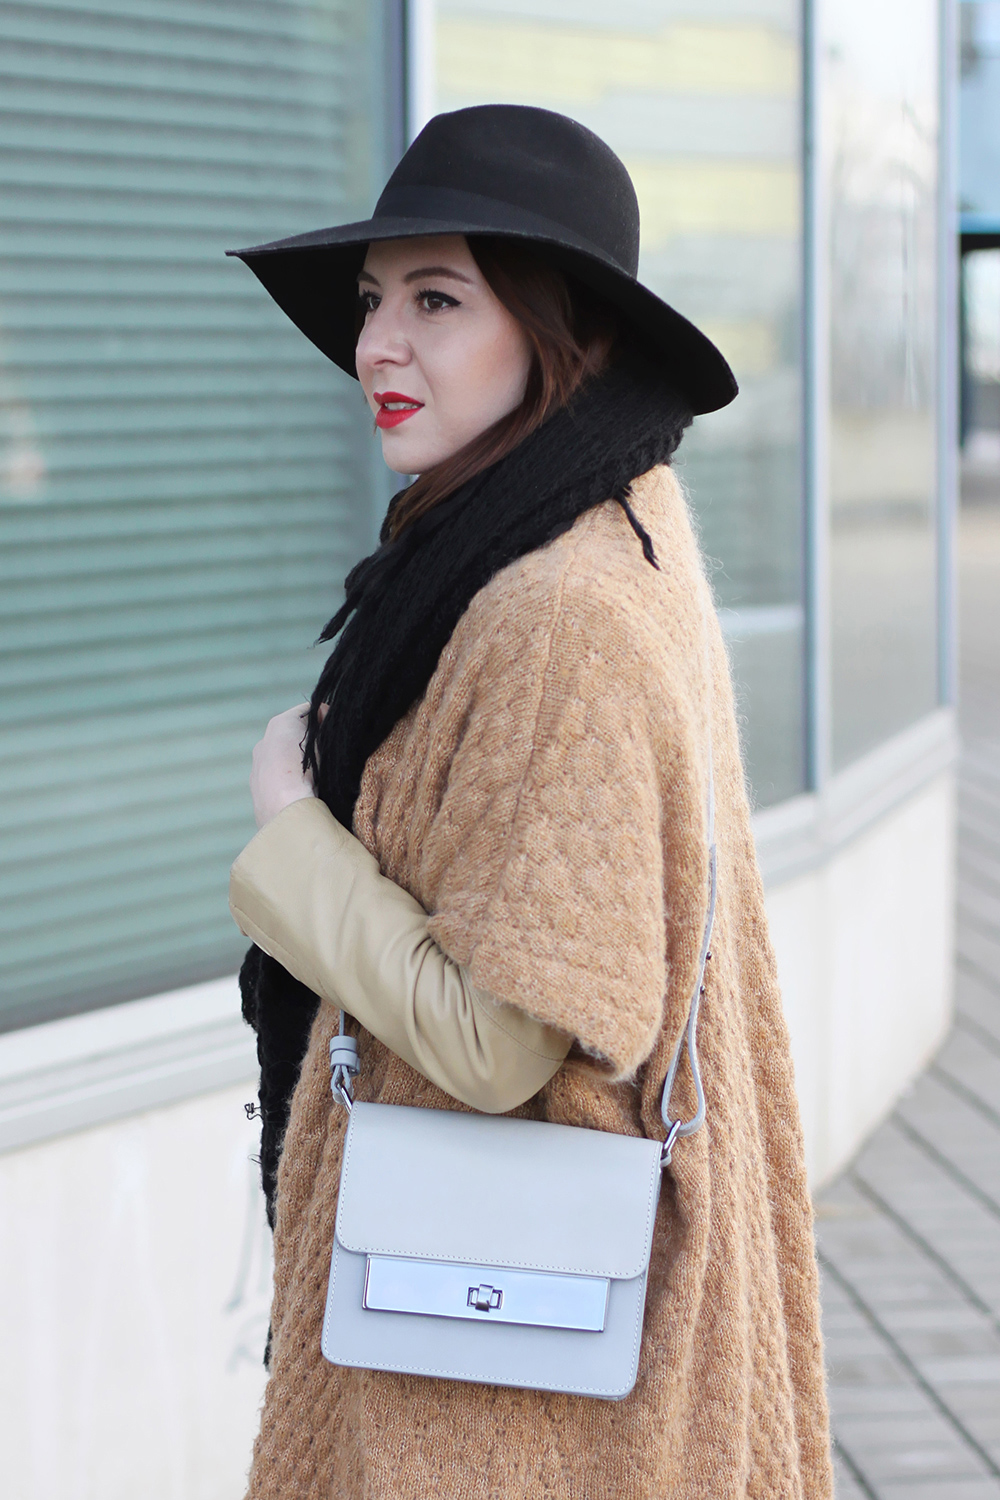 who is mocca, blogger tirol, fashionblogger, ootd, layering, lagenlook, beige, grau, neutral shades, wie kombinieren, how to style, wie traegt man, cape, poncho, anklets, fedora, rote lippen, ledermantel, vintage, topshop, cross body, fransenschal, barts, primark